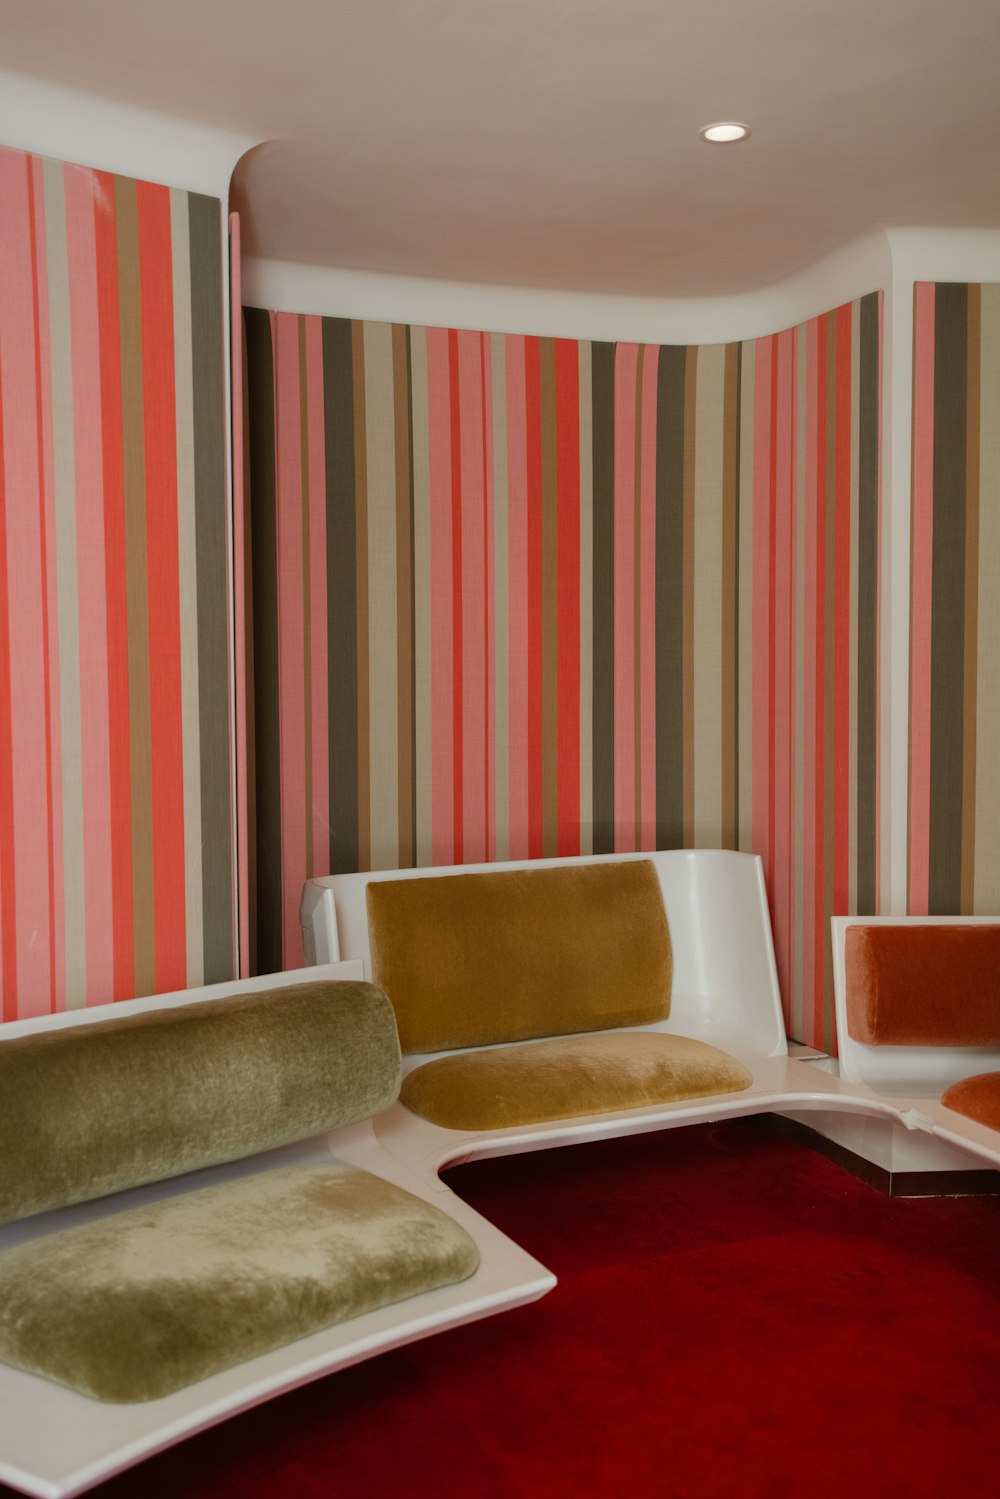 a living room with a red carpet and striped walls